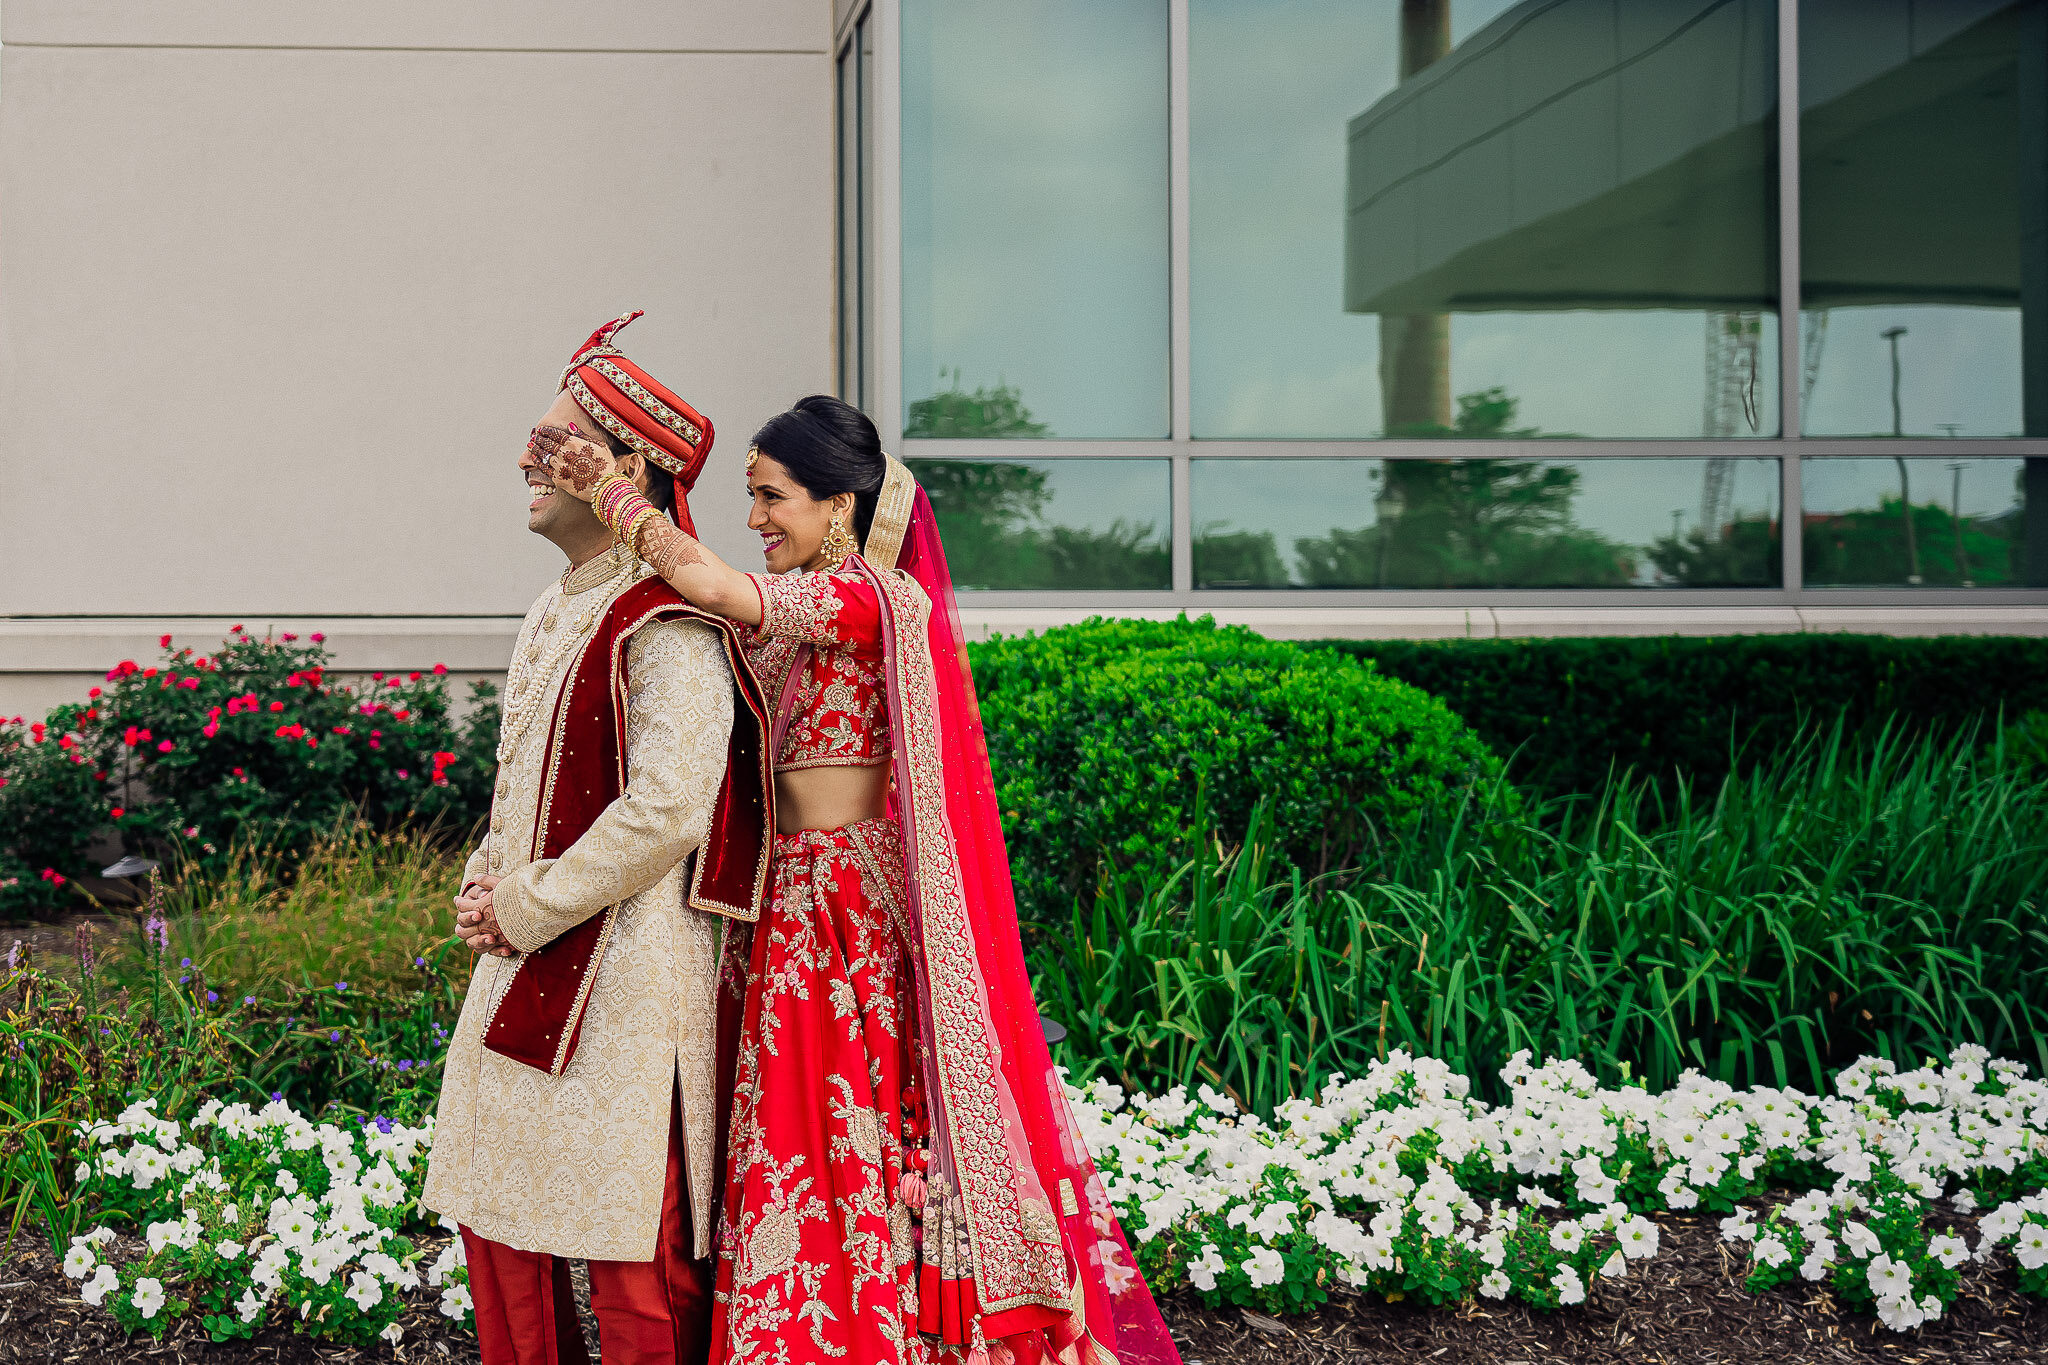 CHASE CENTER ON THE RIVERFRONT INDIAN WEDDING